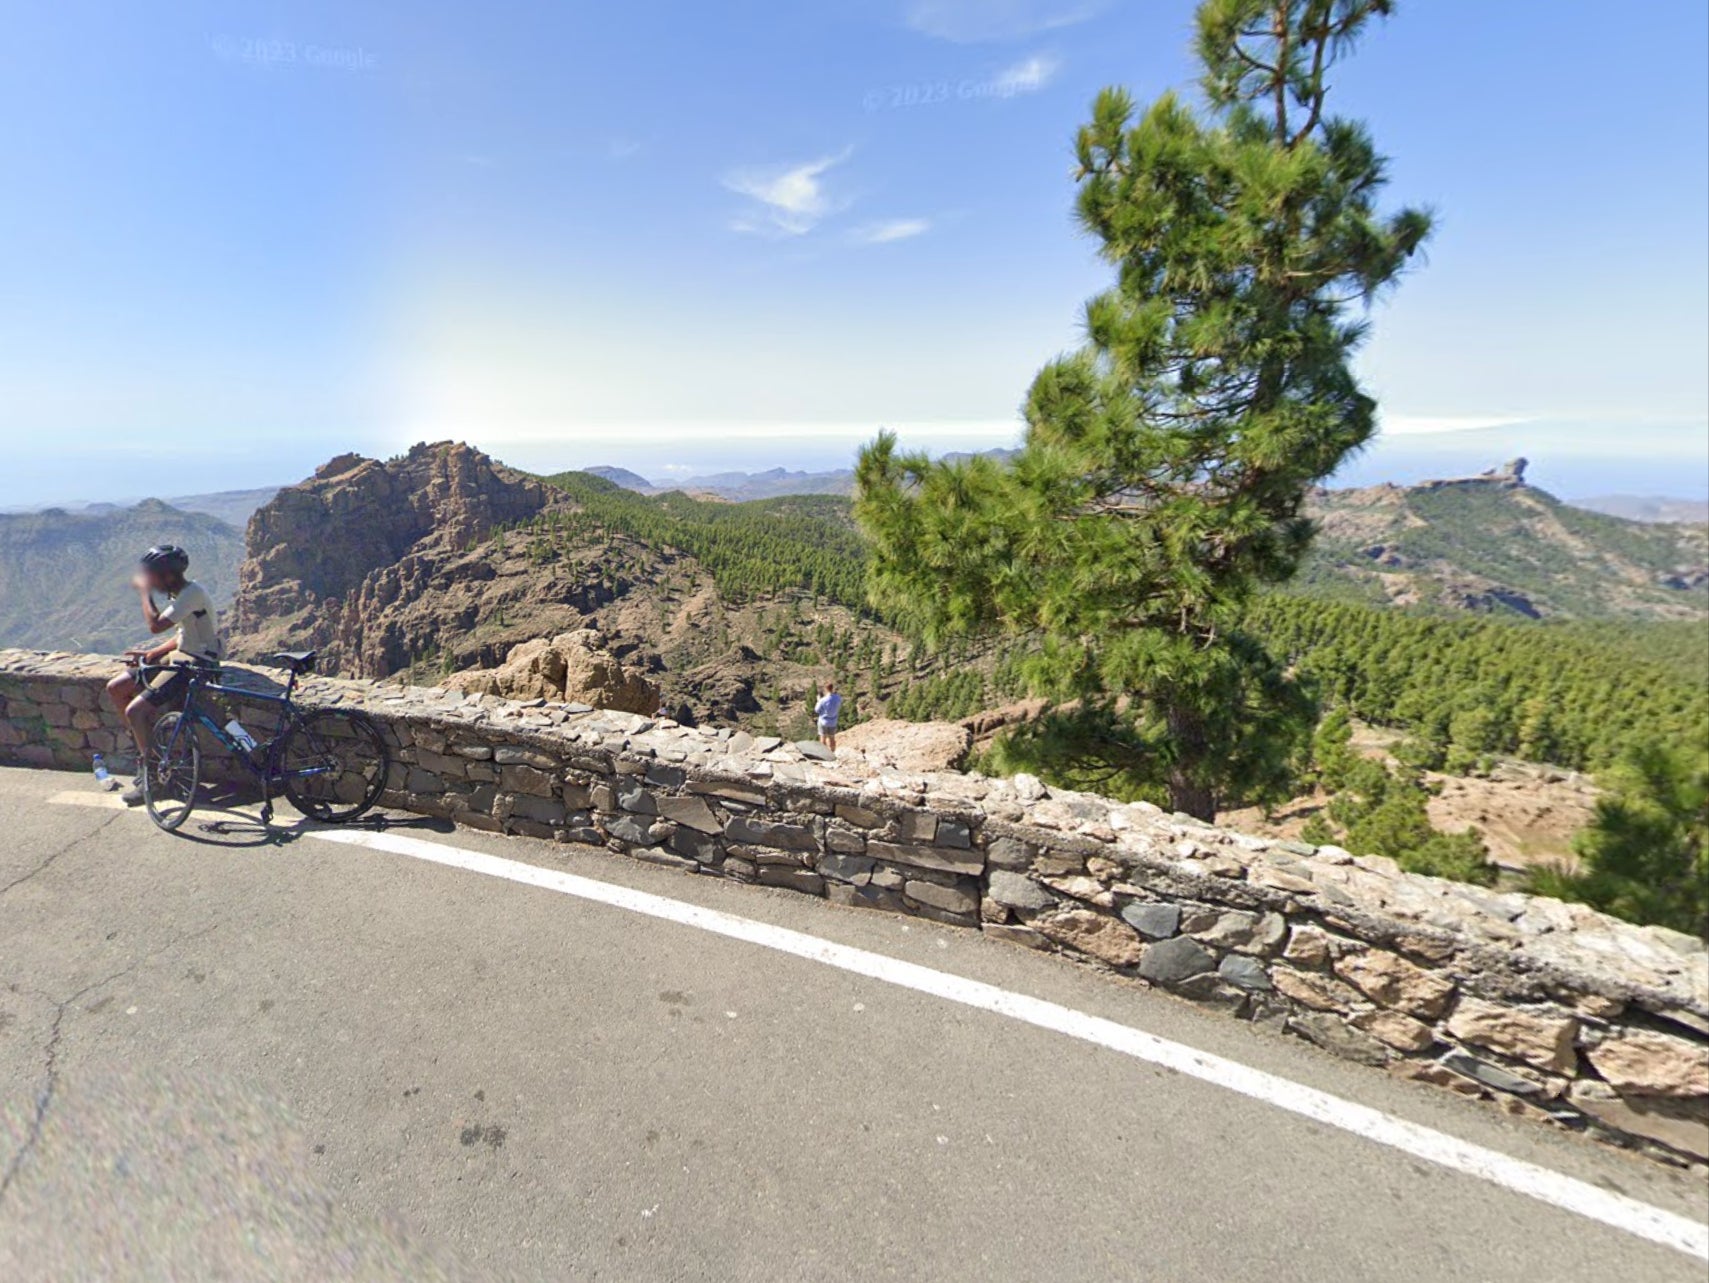 The man was reported missing on Monday while hiking at Pico de Las Nieves